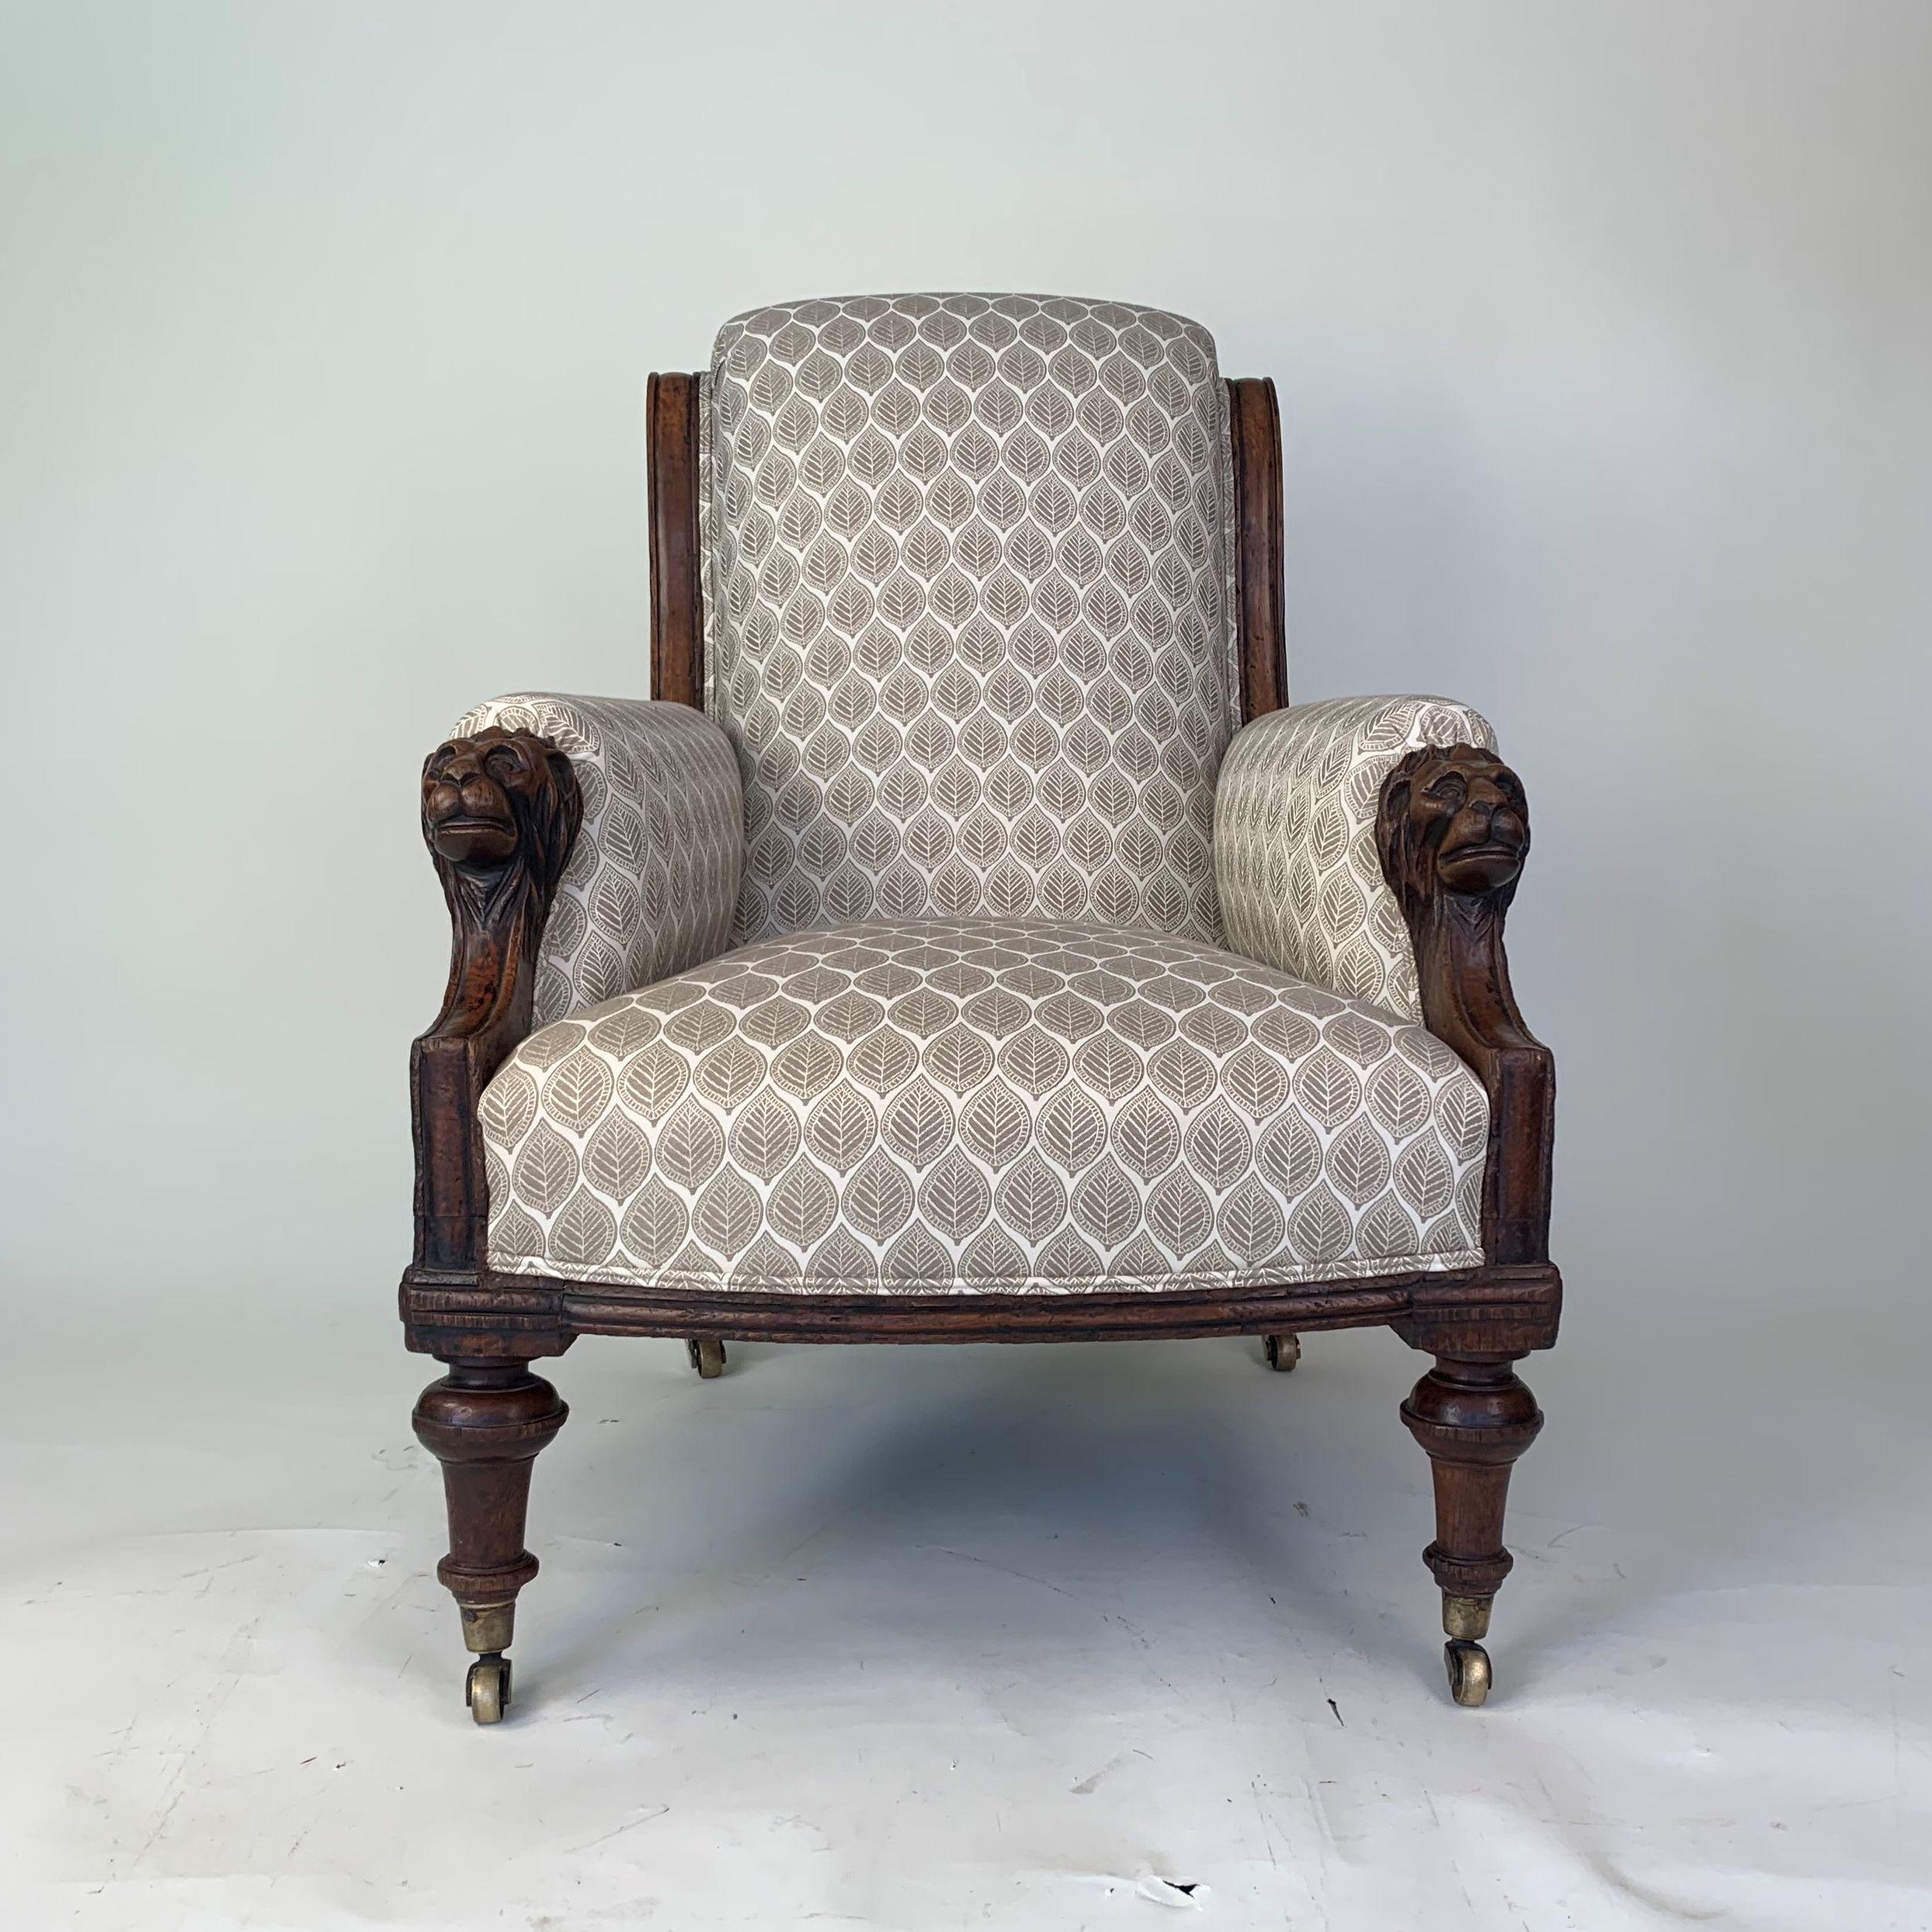 An unusual mid 19th century stylish upholstered armchair with oak framed carved with lion's heads at the top of each arm. The swept back legs continuing upwards to form the sides of the backrest, and turned front legs of inverted vase form and